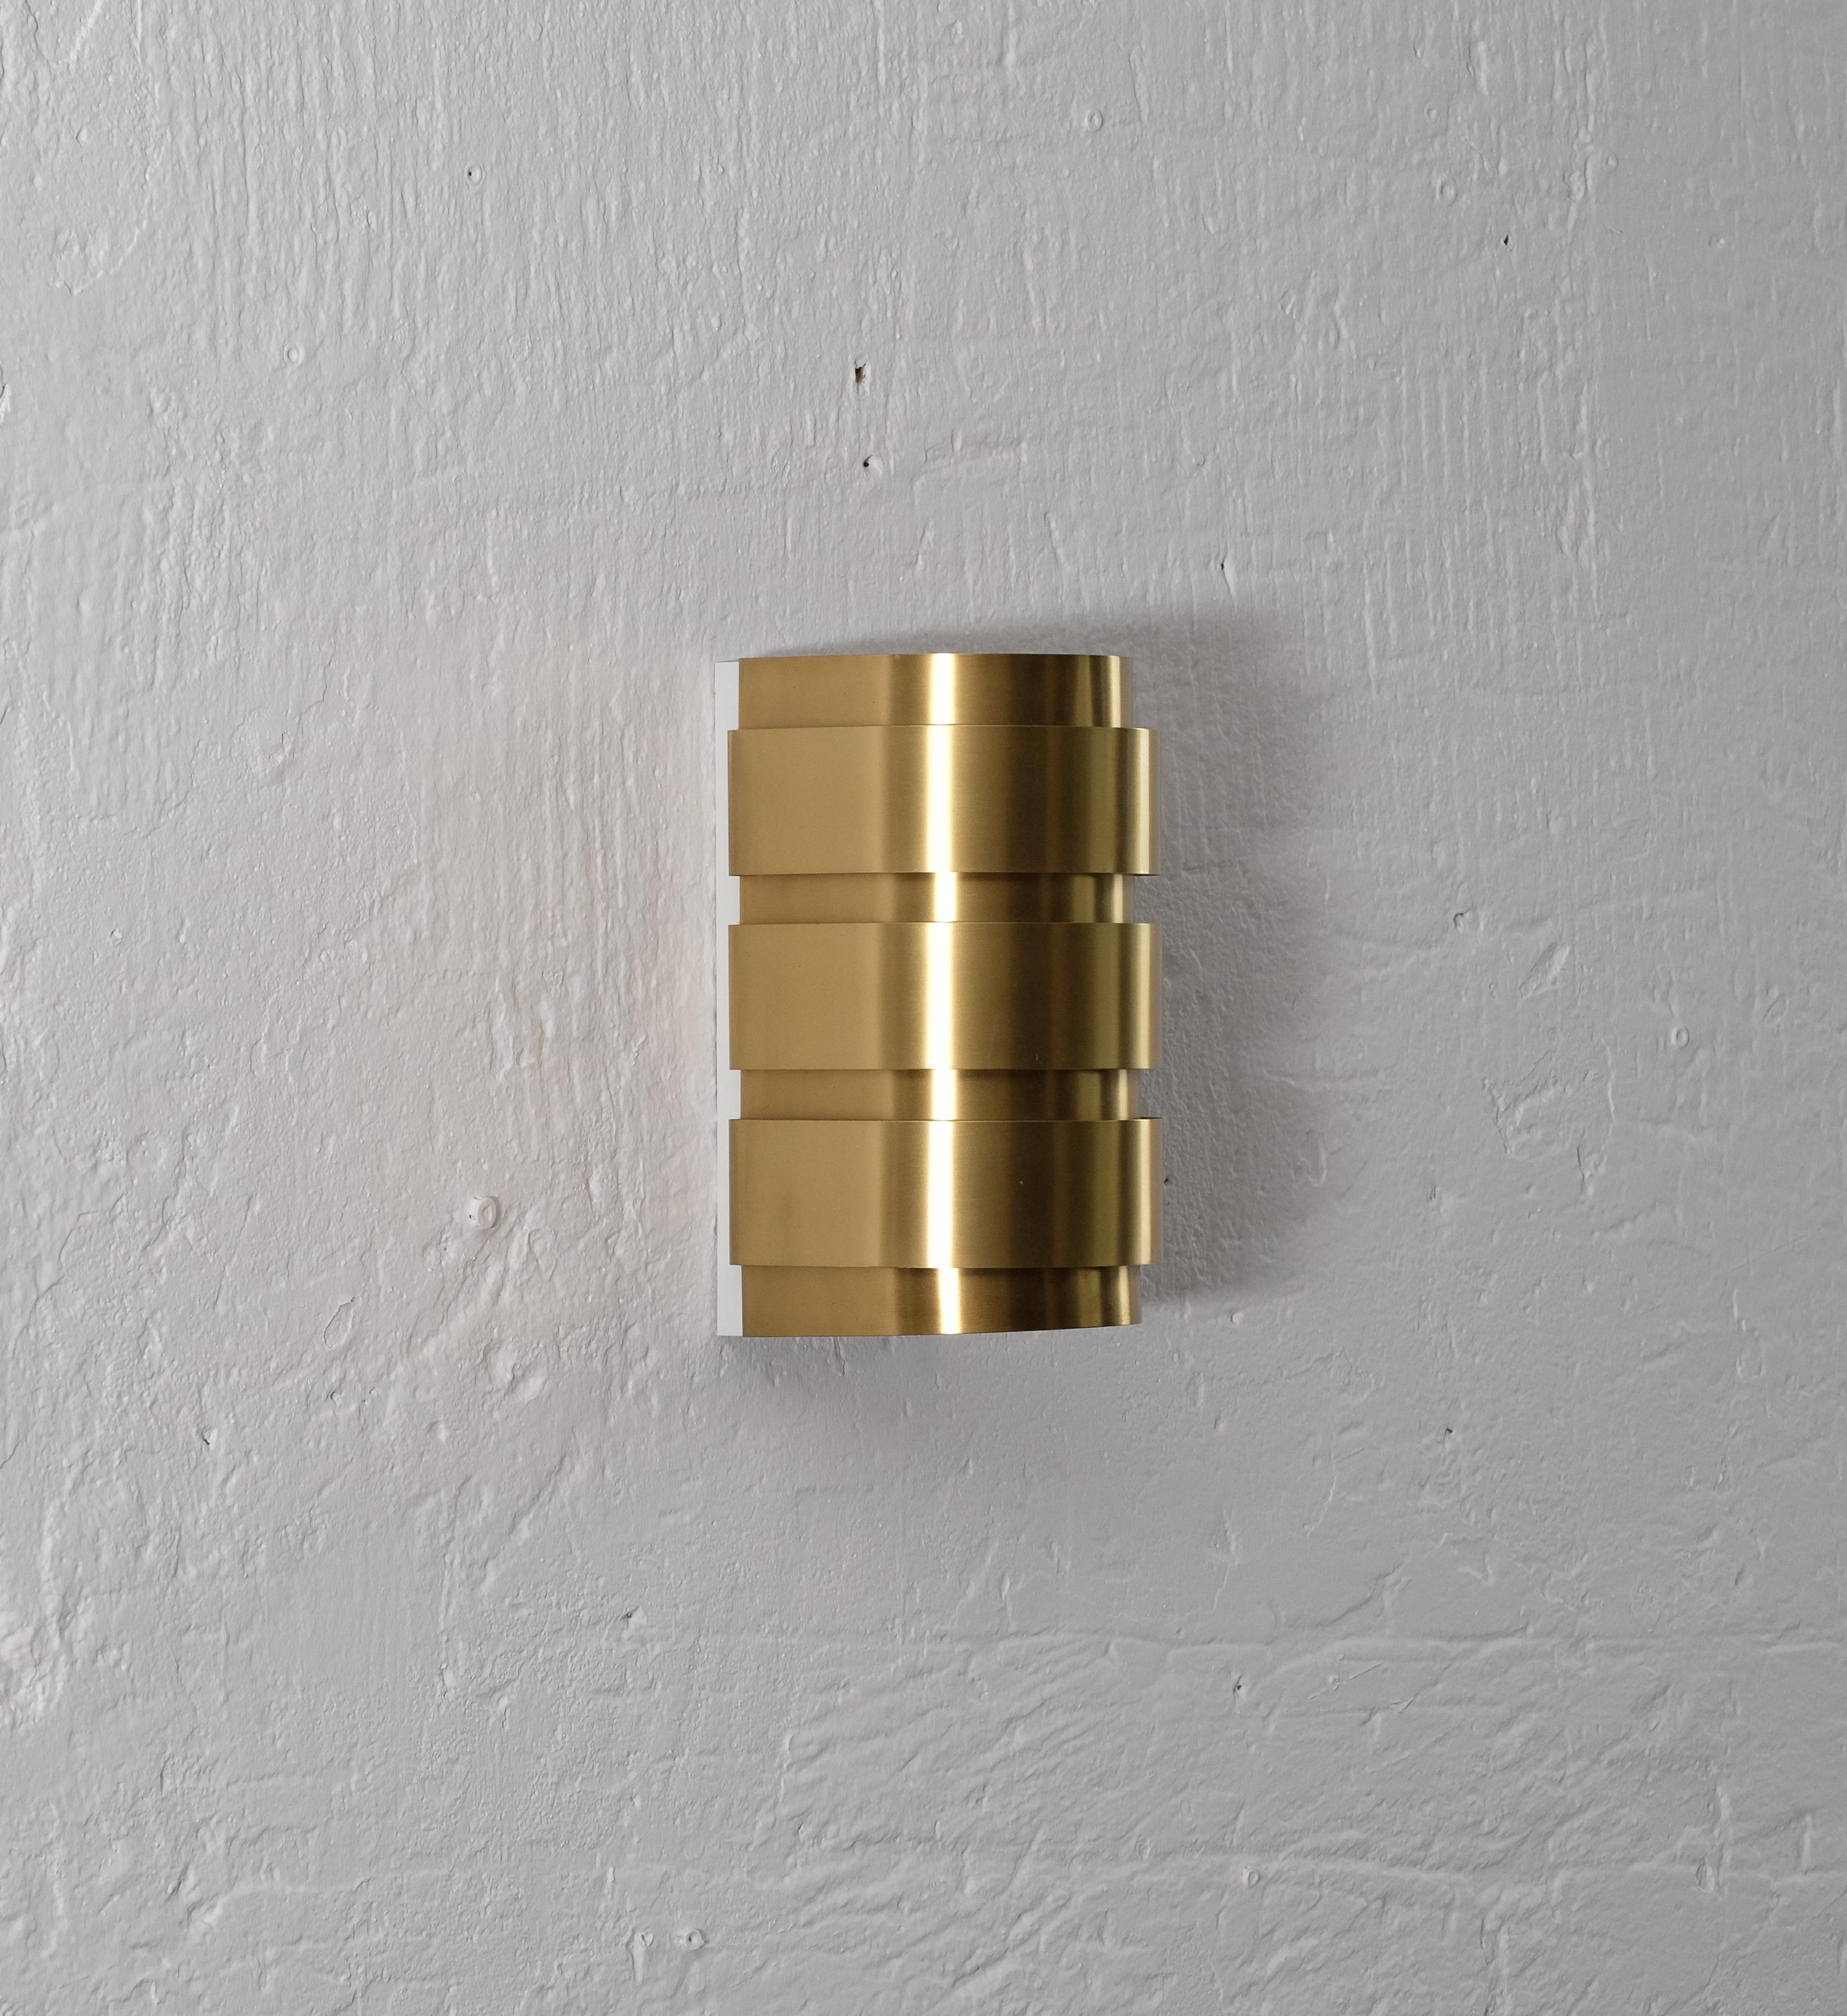 Swedish wall lights model V-155 designed by Hans-Agne Jakobsson, produced in Markaryd, Sweden, 1960s.
Please note: listed price is for one (1) wall light.